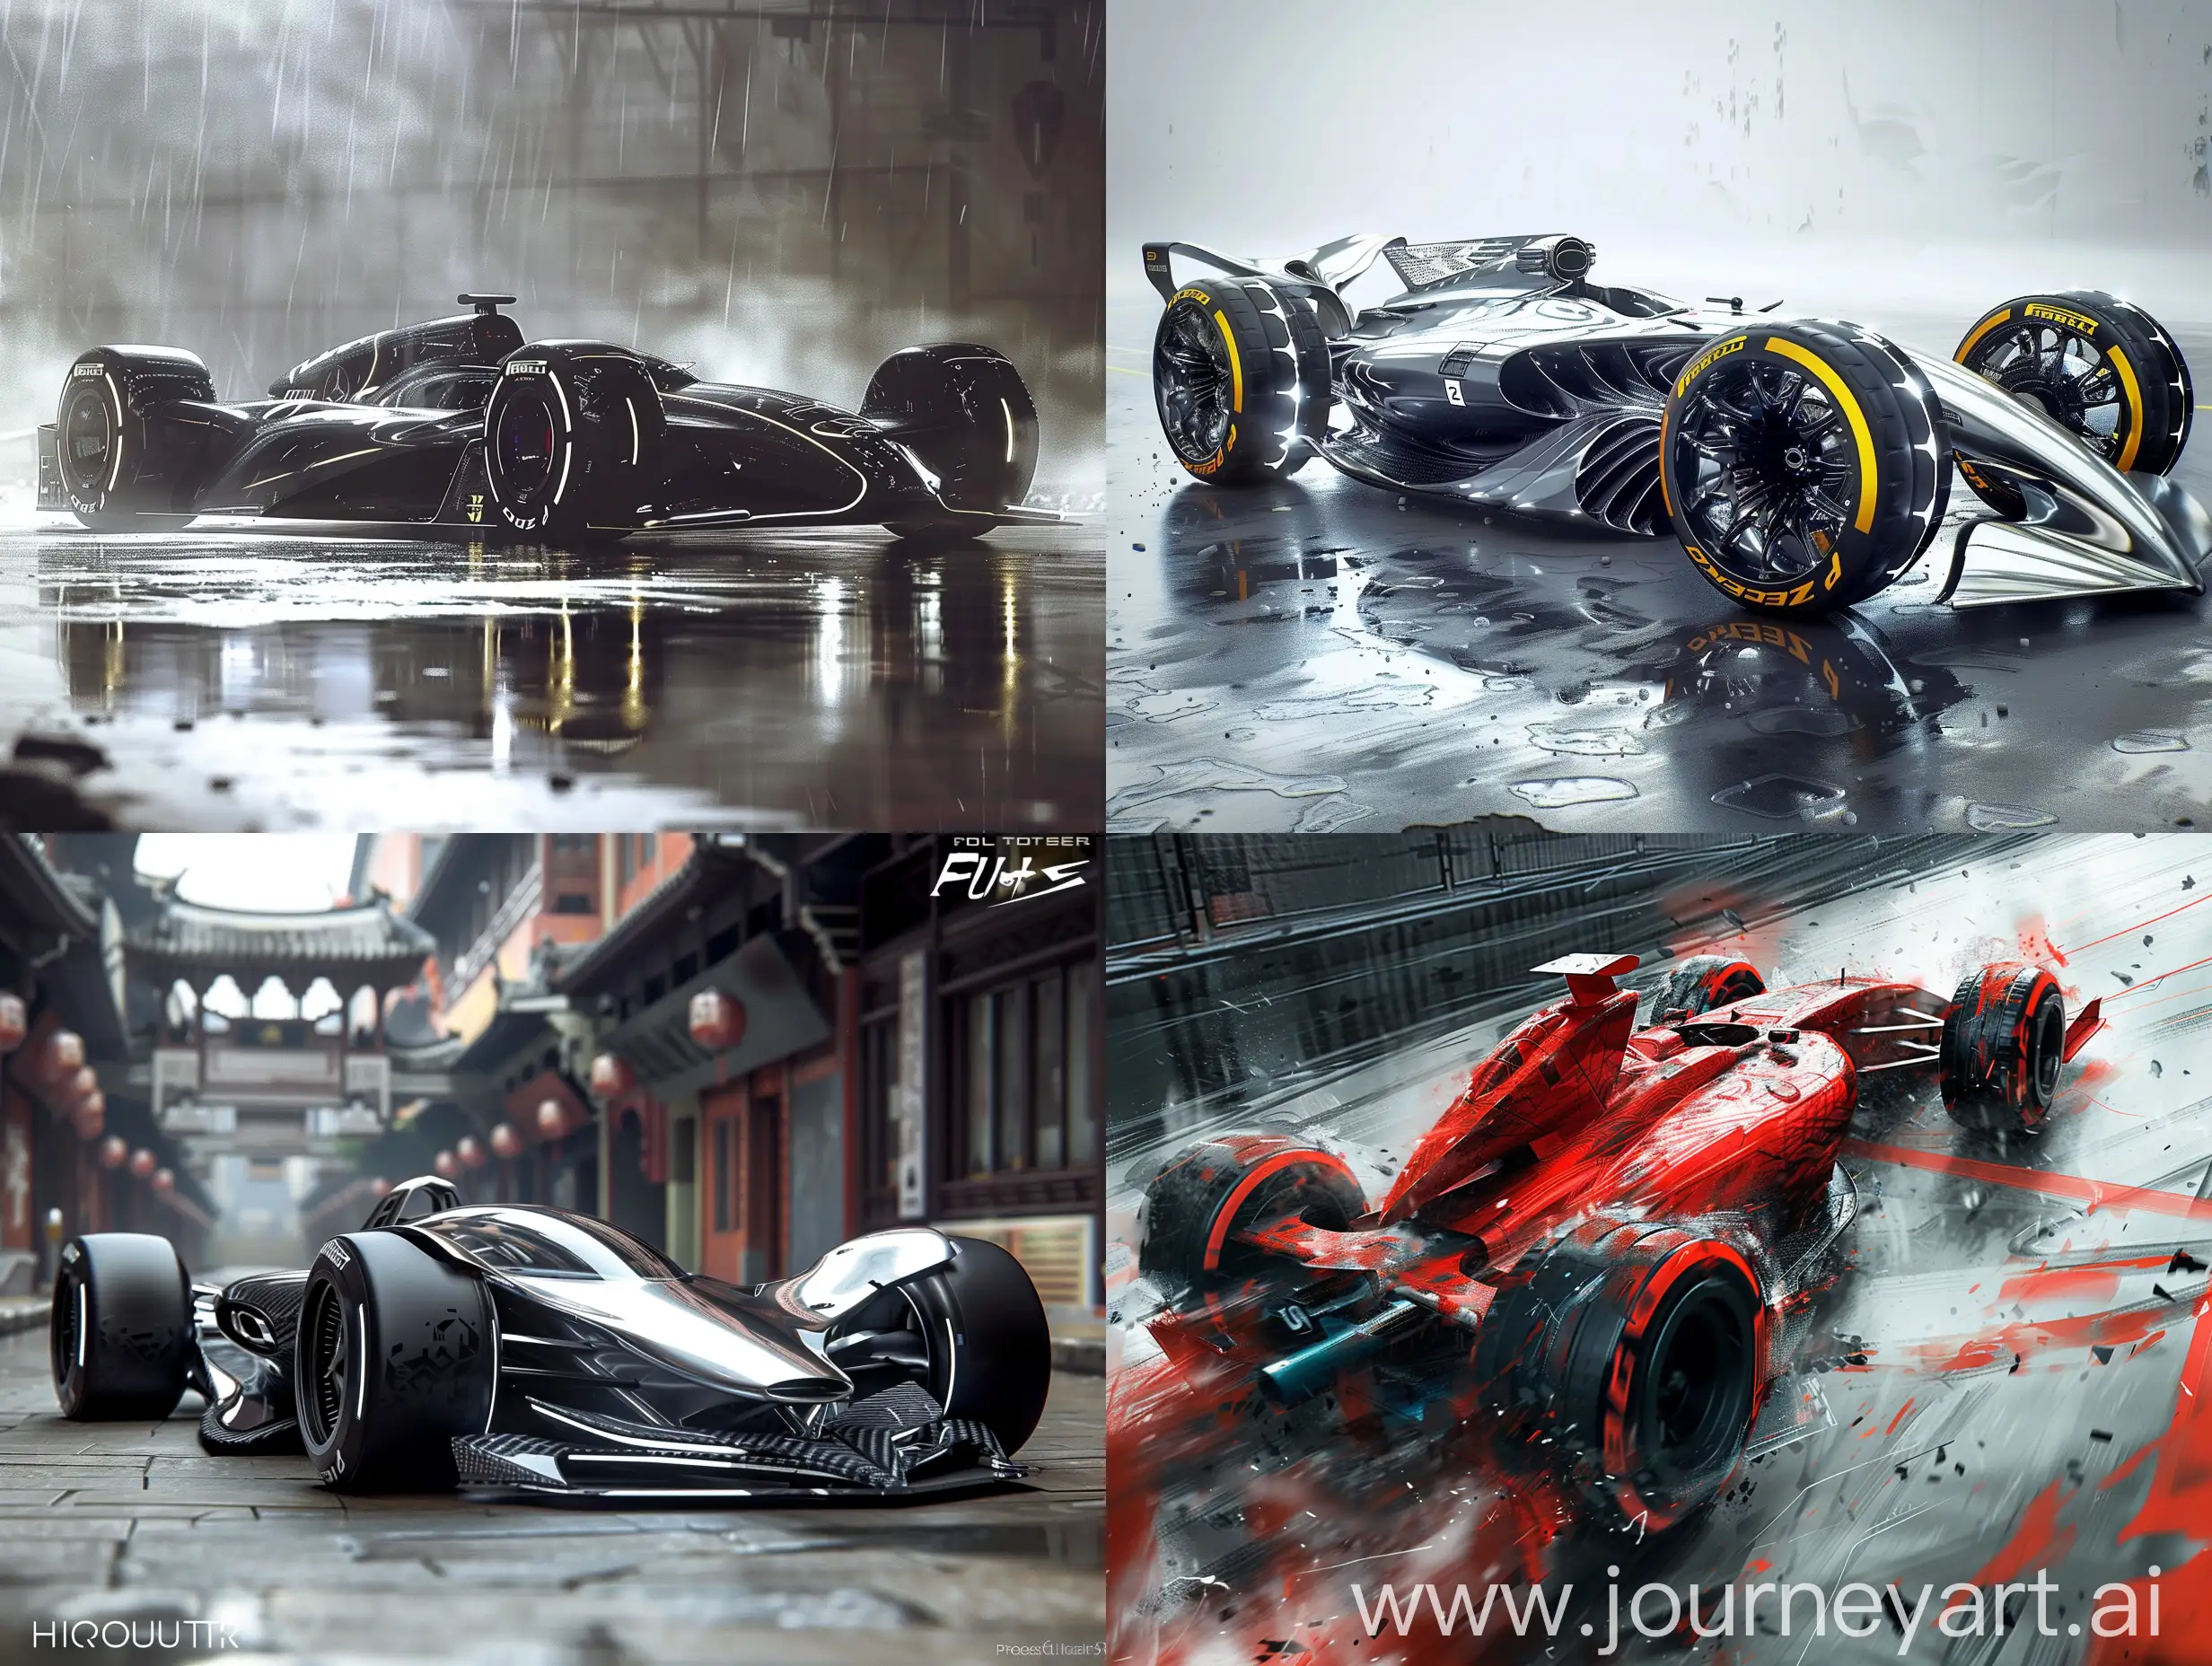 (F1 car:1.2),(Futuristic:1.2), (Sleek:1.1), (Dynamic:1.1), (Industrial:1.1), (High-tech:1.1), (Powerful:1.1), (Innovative:1.1), (Stylish:1.1), (Robust:1.1), (Detailed:1.1), (Edgy:1.1), (Aggressive:1.1), (Fierce:1.1), (Modern:1.1), (Intricate:1.1), (Elegant:1.1), (Sharp:1.1), (Shiny:1.1), (Glowing:1.1), (Hi-res:1.1), (Professional:1.1), (Product Shot:1.1), (Cluttered:1.1), (Ambient Lighting:1.1), (Close-up Shot:1.1), (High-contrast:1.1), (Artistic:1.1), (Focal Point:1.1), (Expertly Composed:1.1), backgrground artwork by Cai Guo-Qiang--style raw